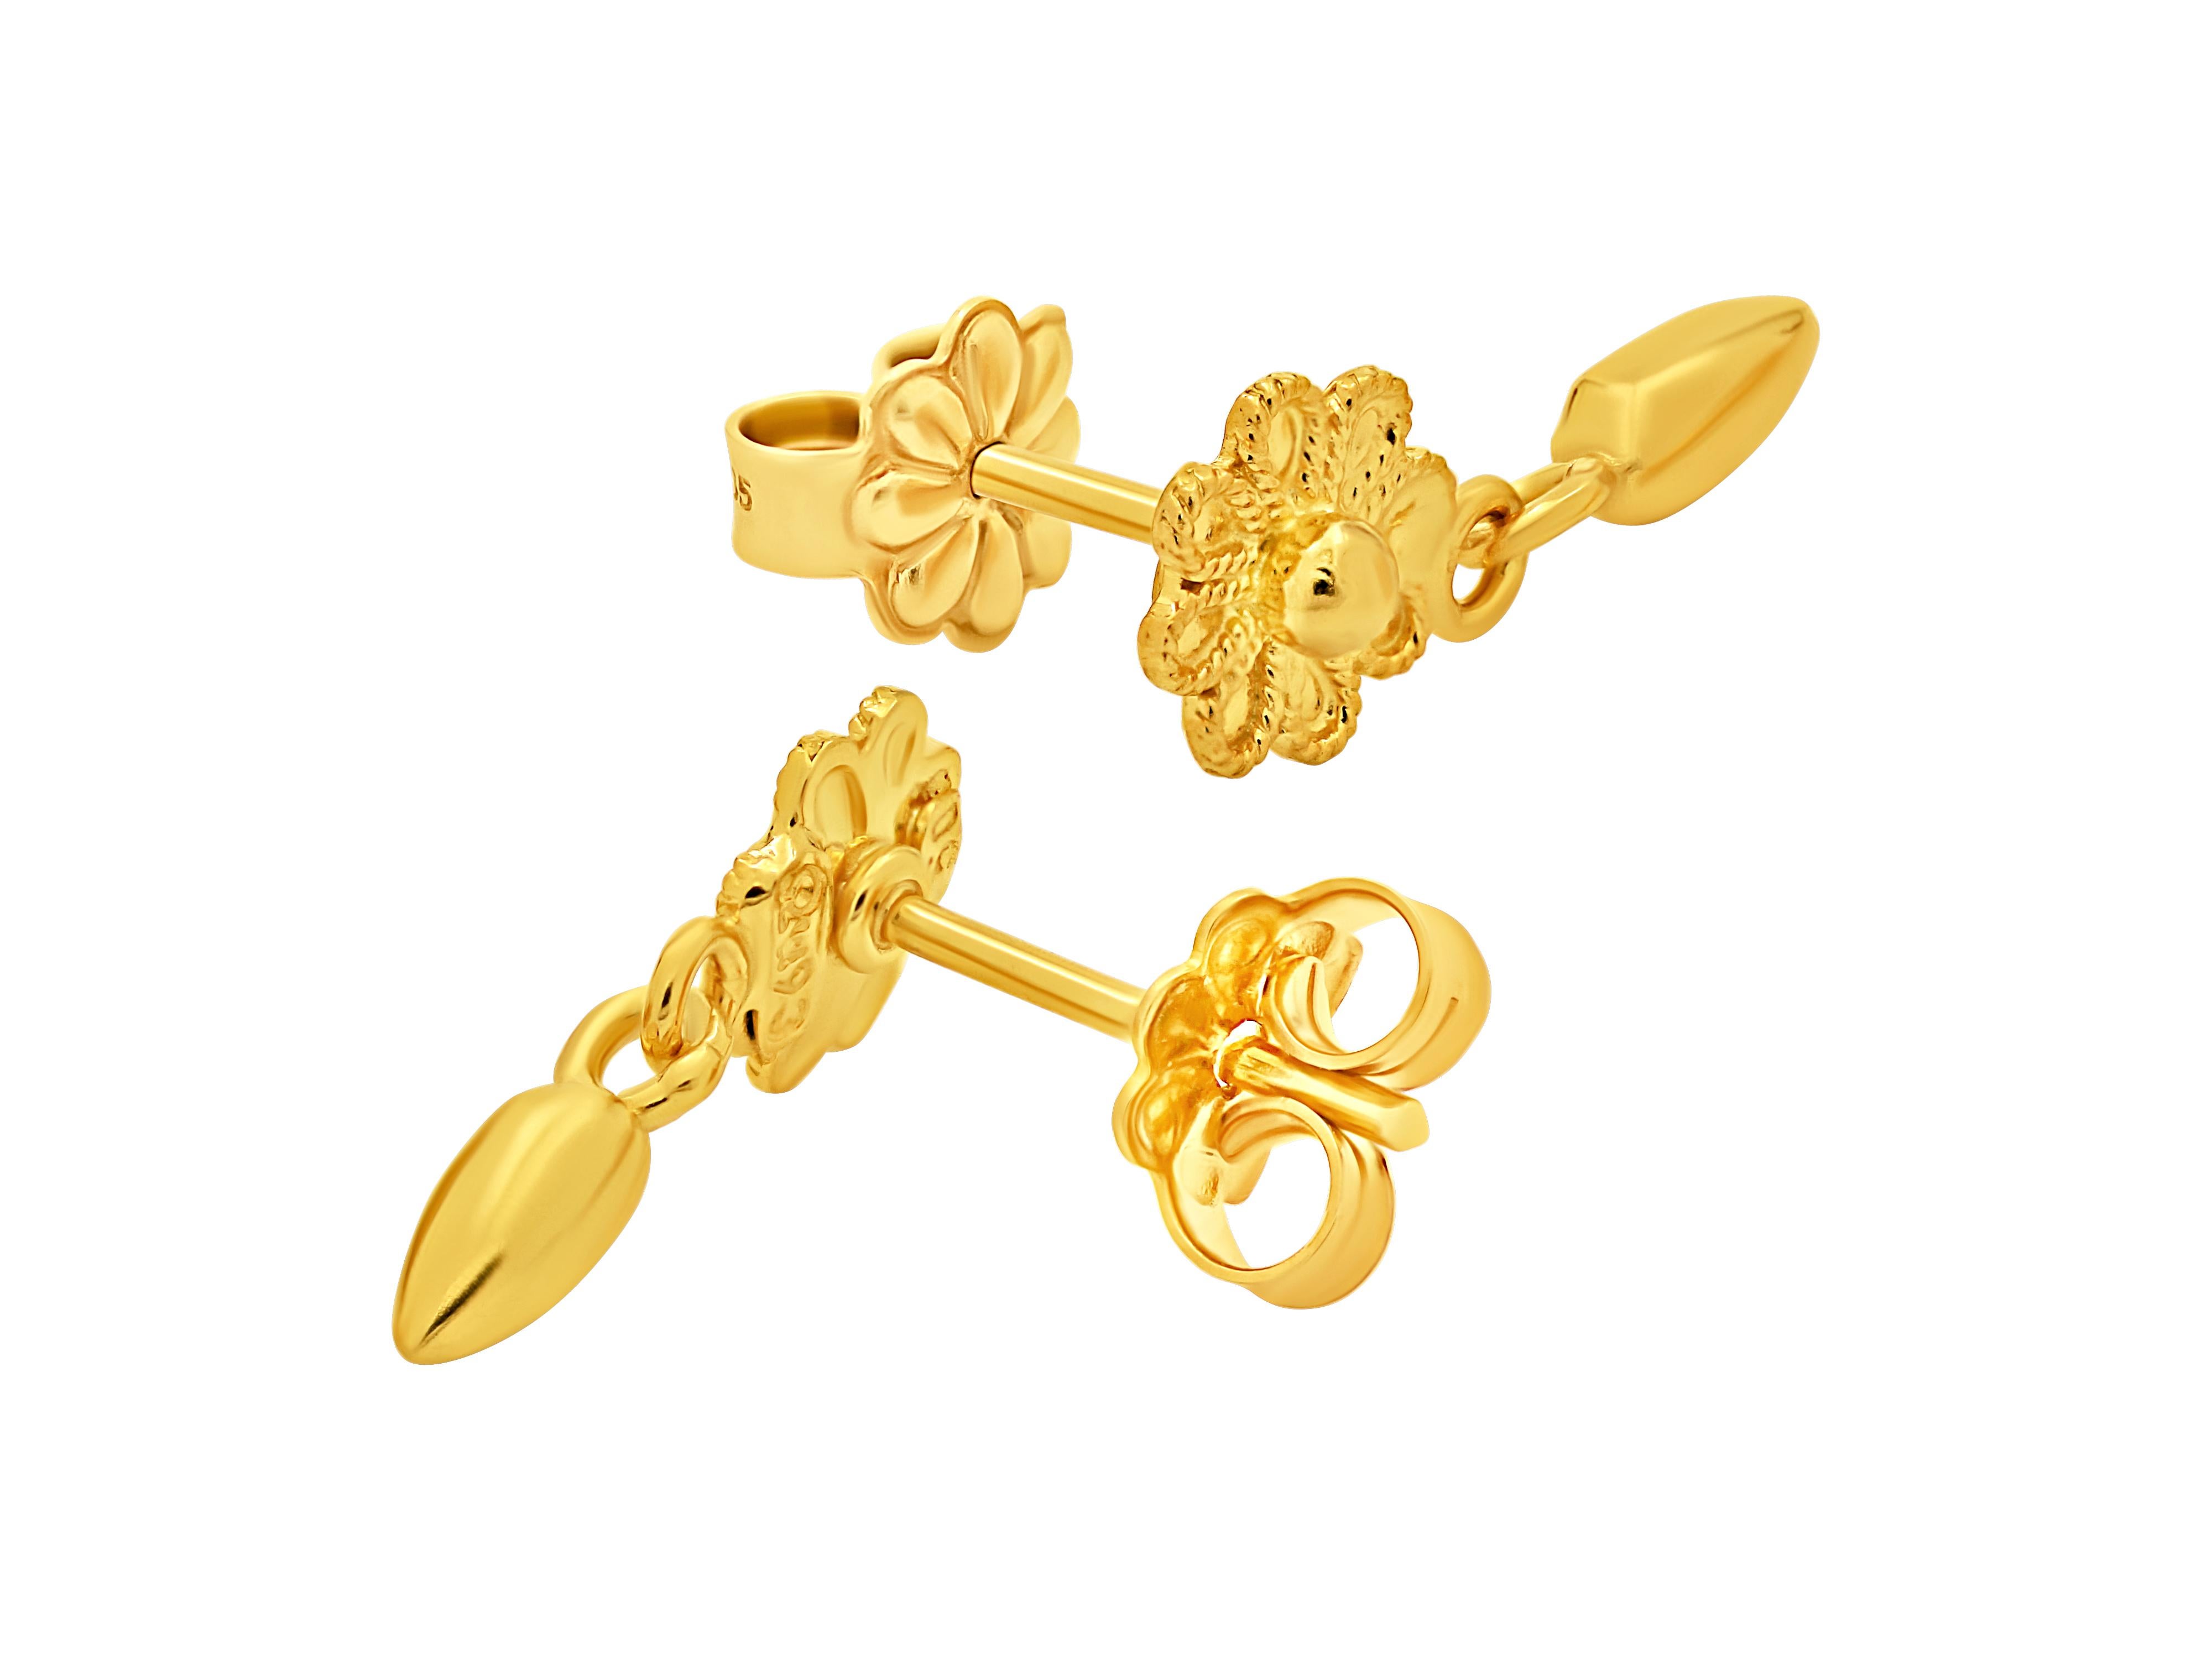 Dangle rosettes earrings with filigrees in 18k yellow gold. A neoclassical museum style work that shows class taste and knowledge.